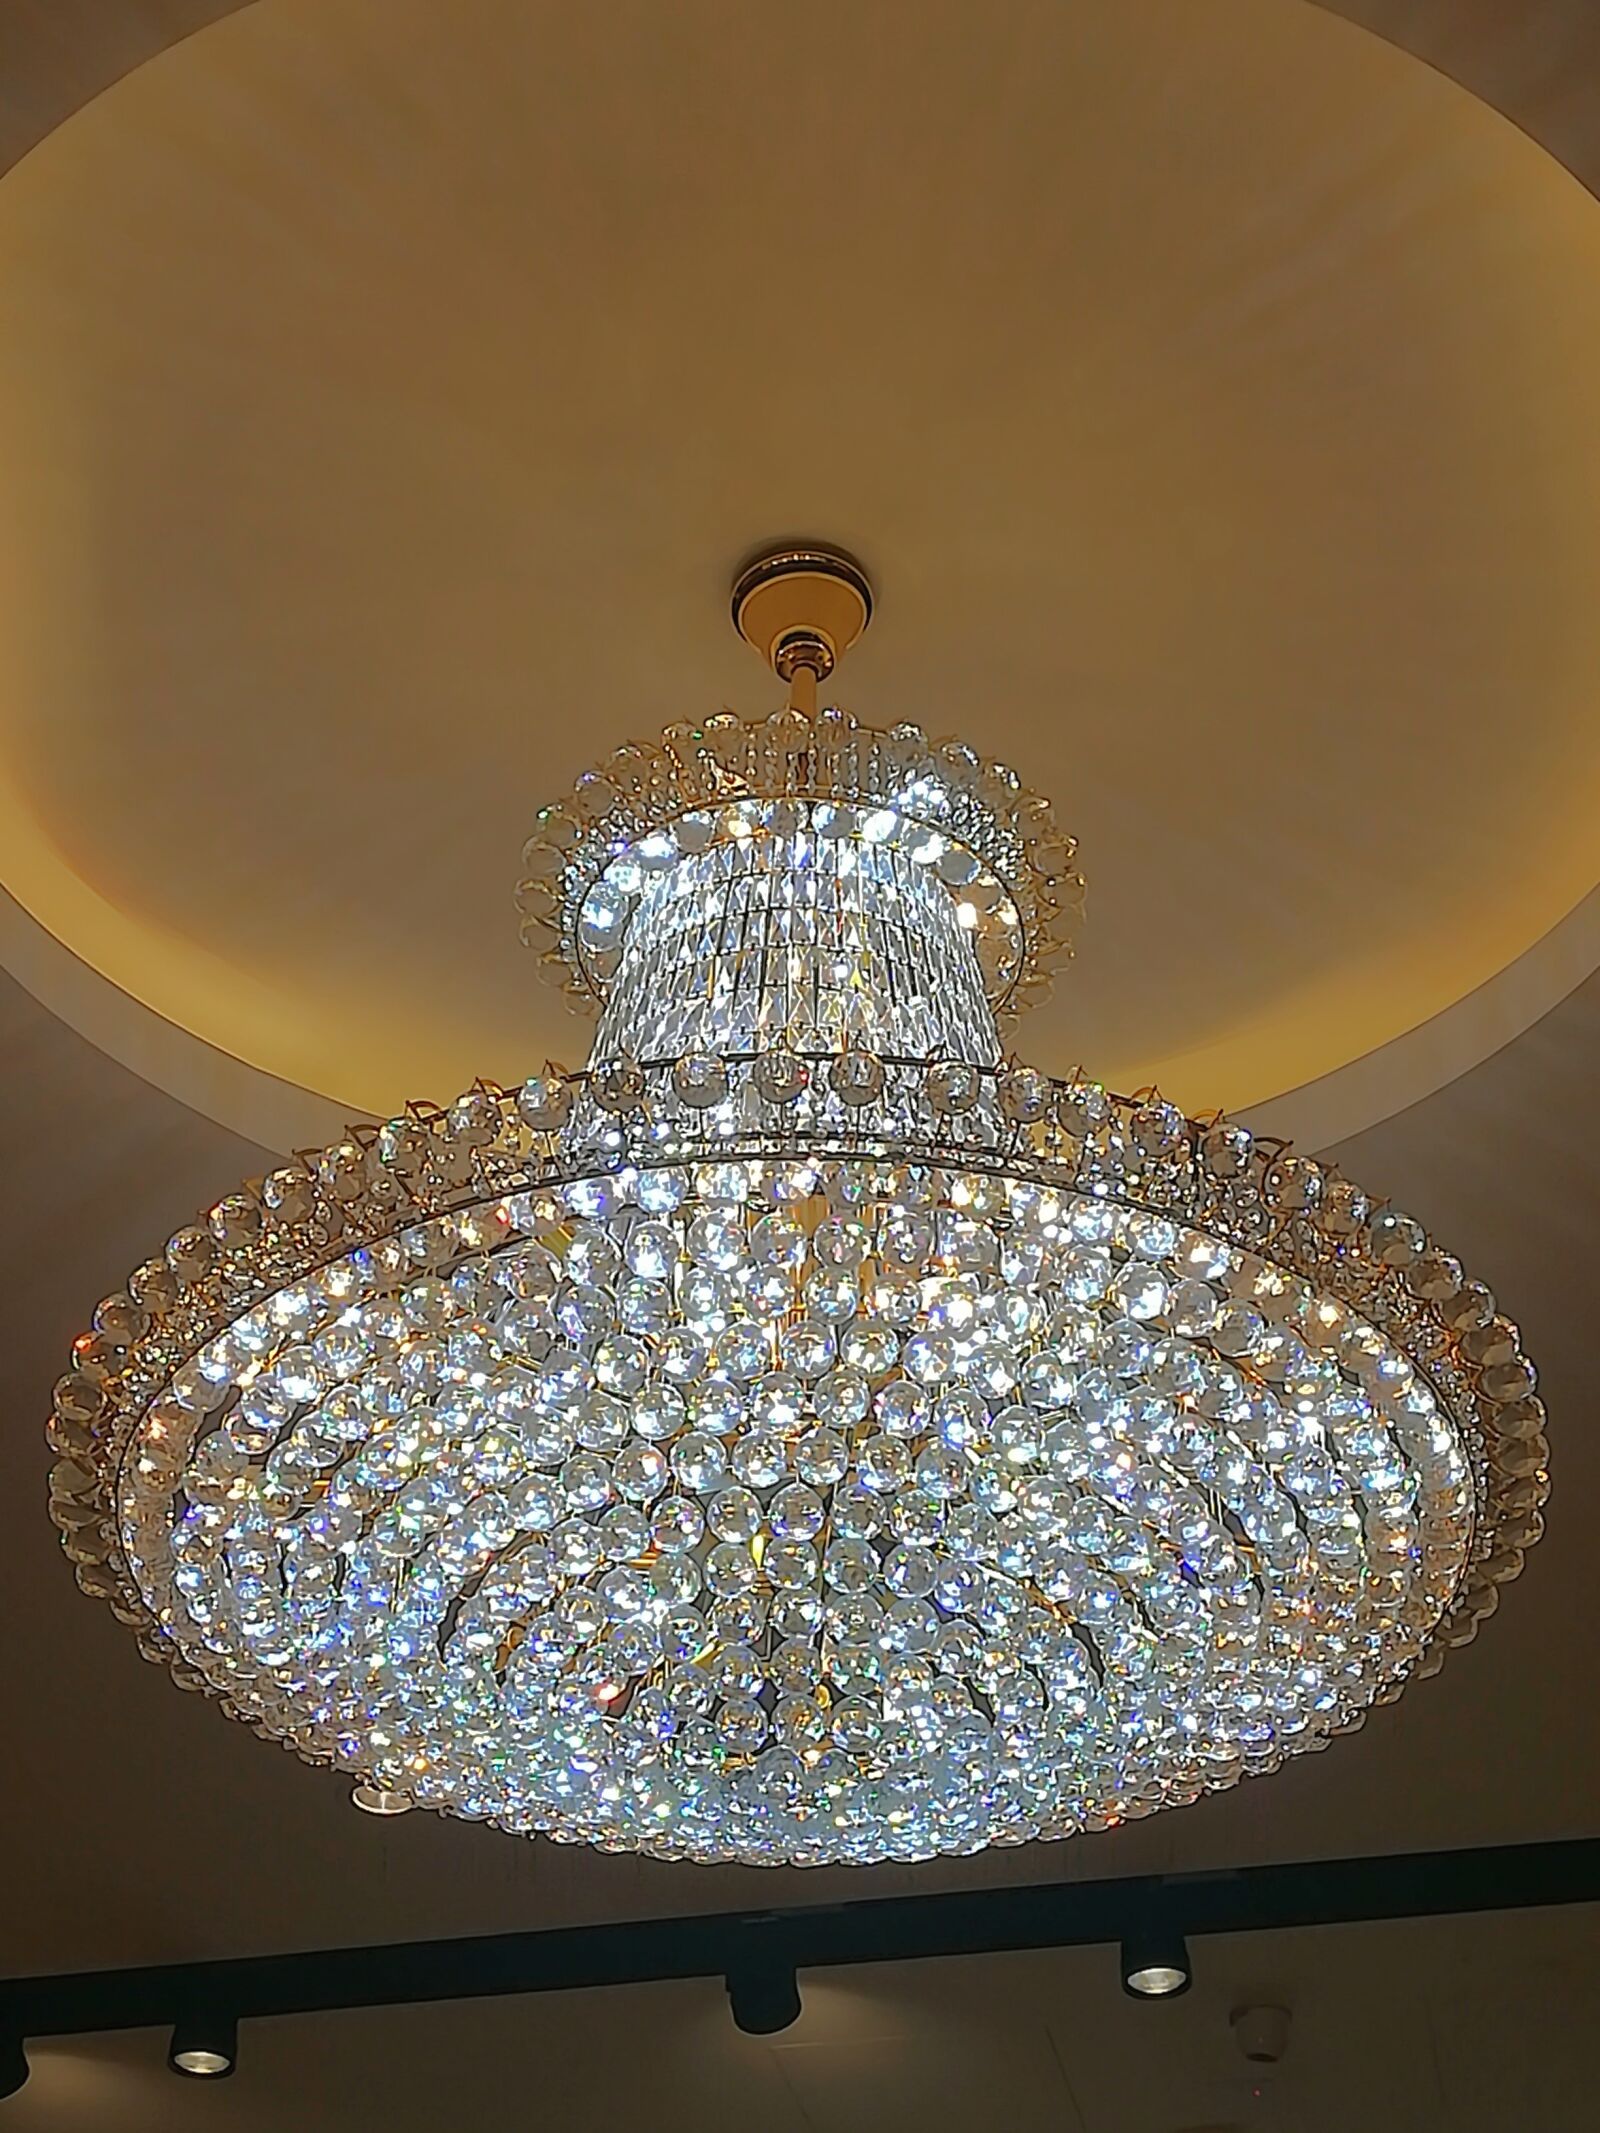 HUAWEI P10 lite sample photo. Ceiling, chandelier, light photography